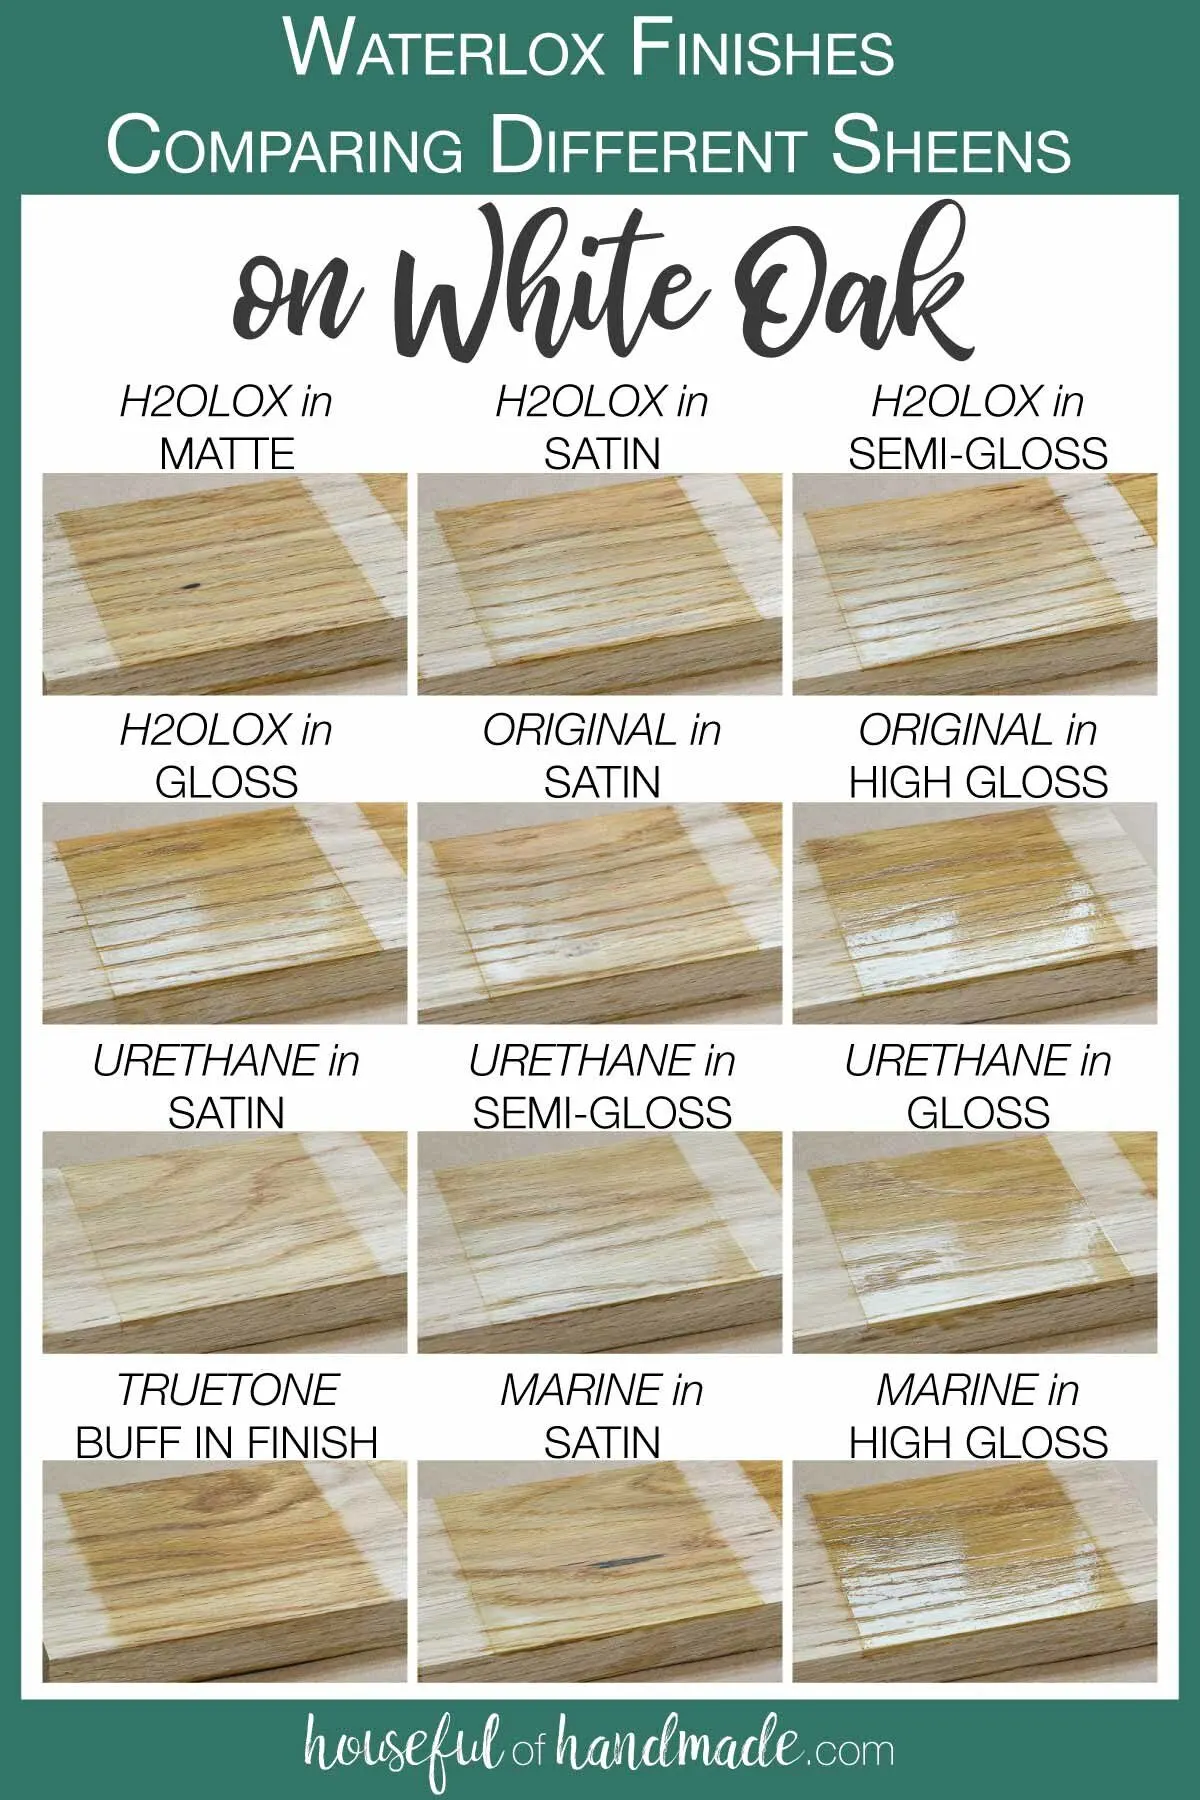 12 samples of the different sheens of all the Waterlox finishes on White Oak boards. 